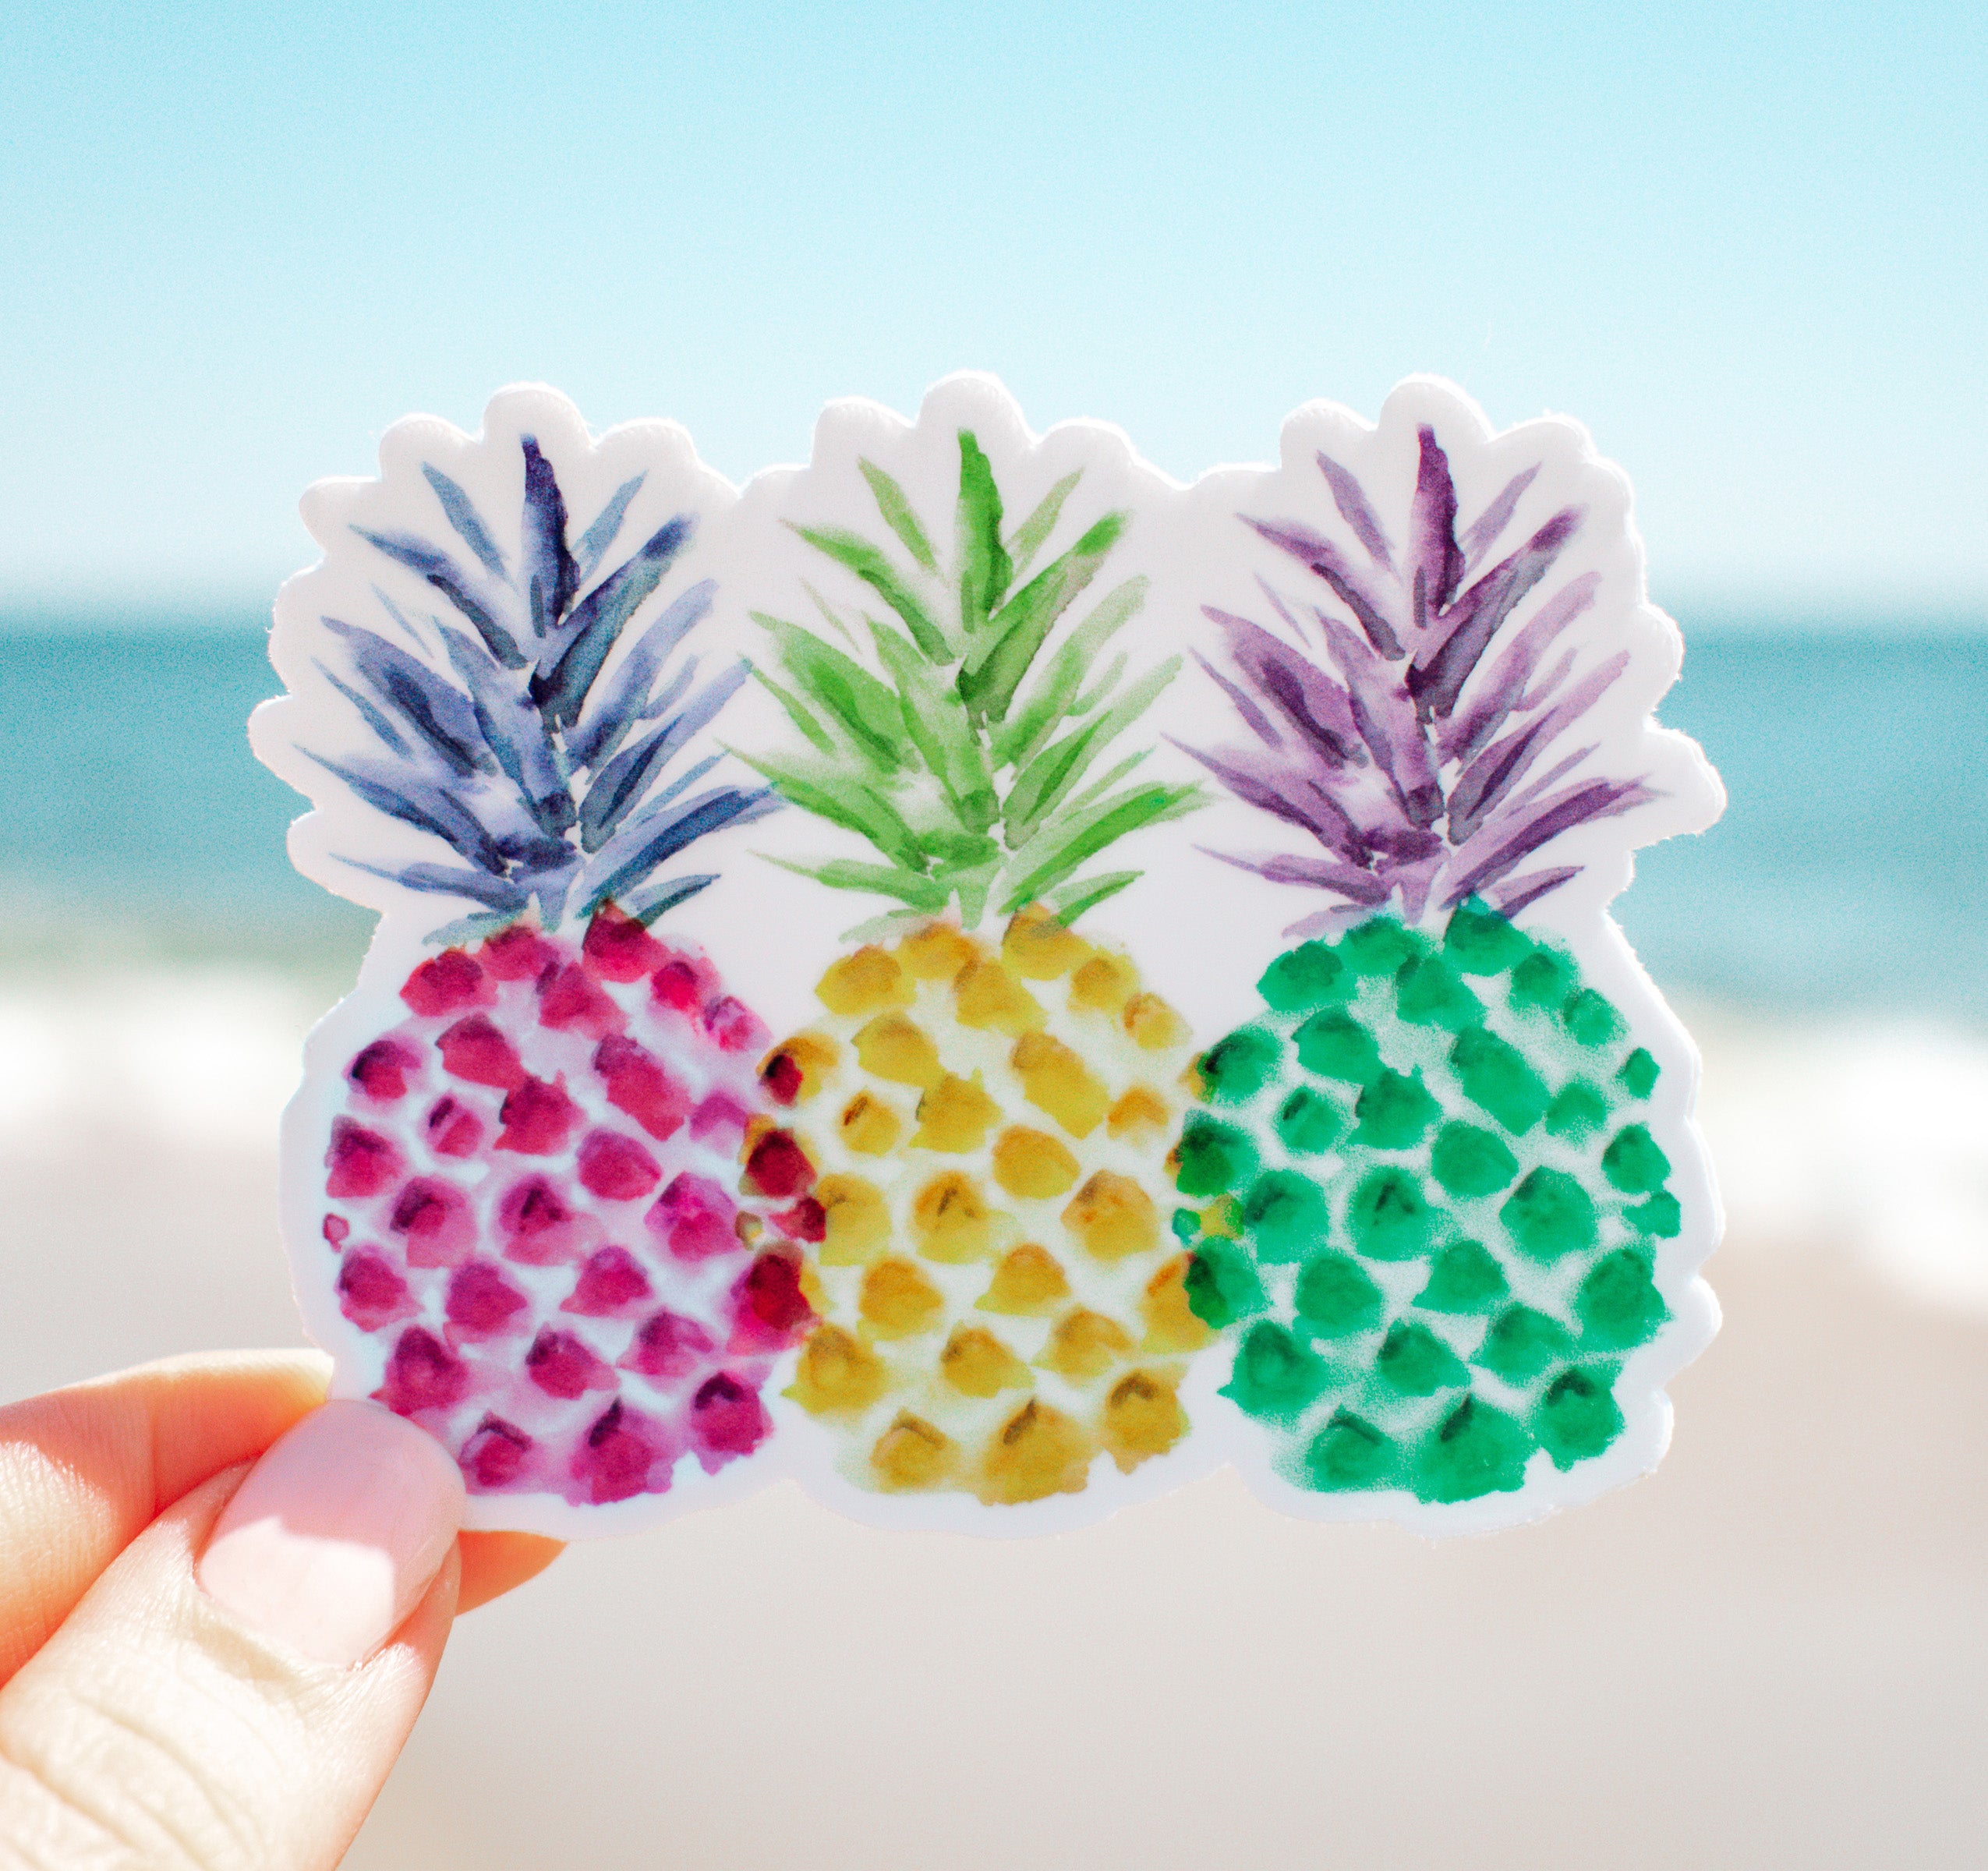 A collection of three colorful pineapples on a vinyl sticker